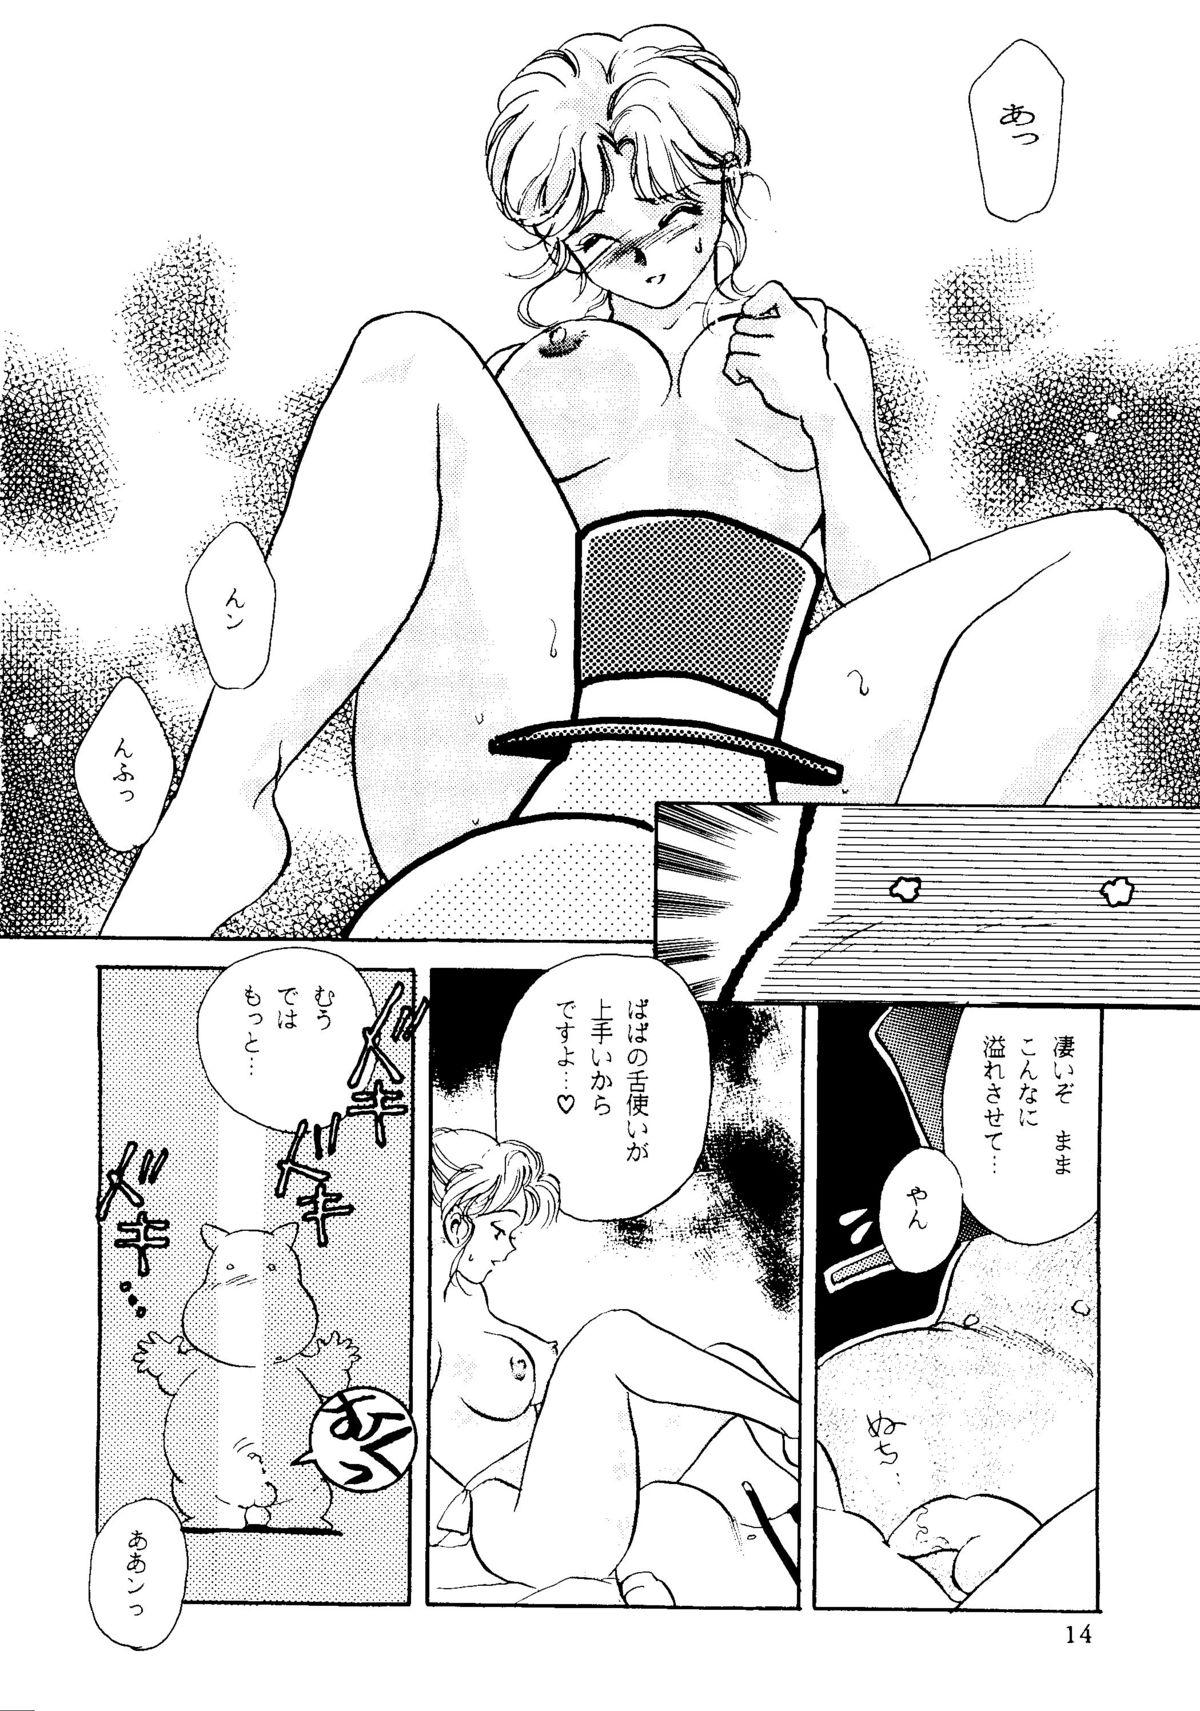 All R KIDS! Vol. 8 - Sailor moon Street fighter Tenchi muyo Red baron Clitoris - Page 10